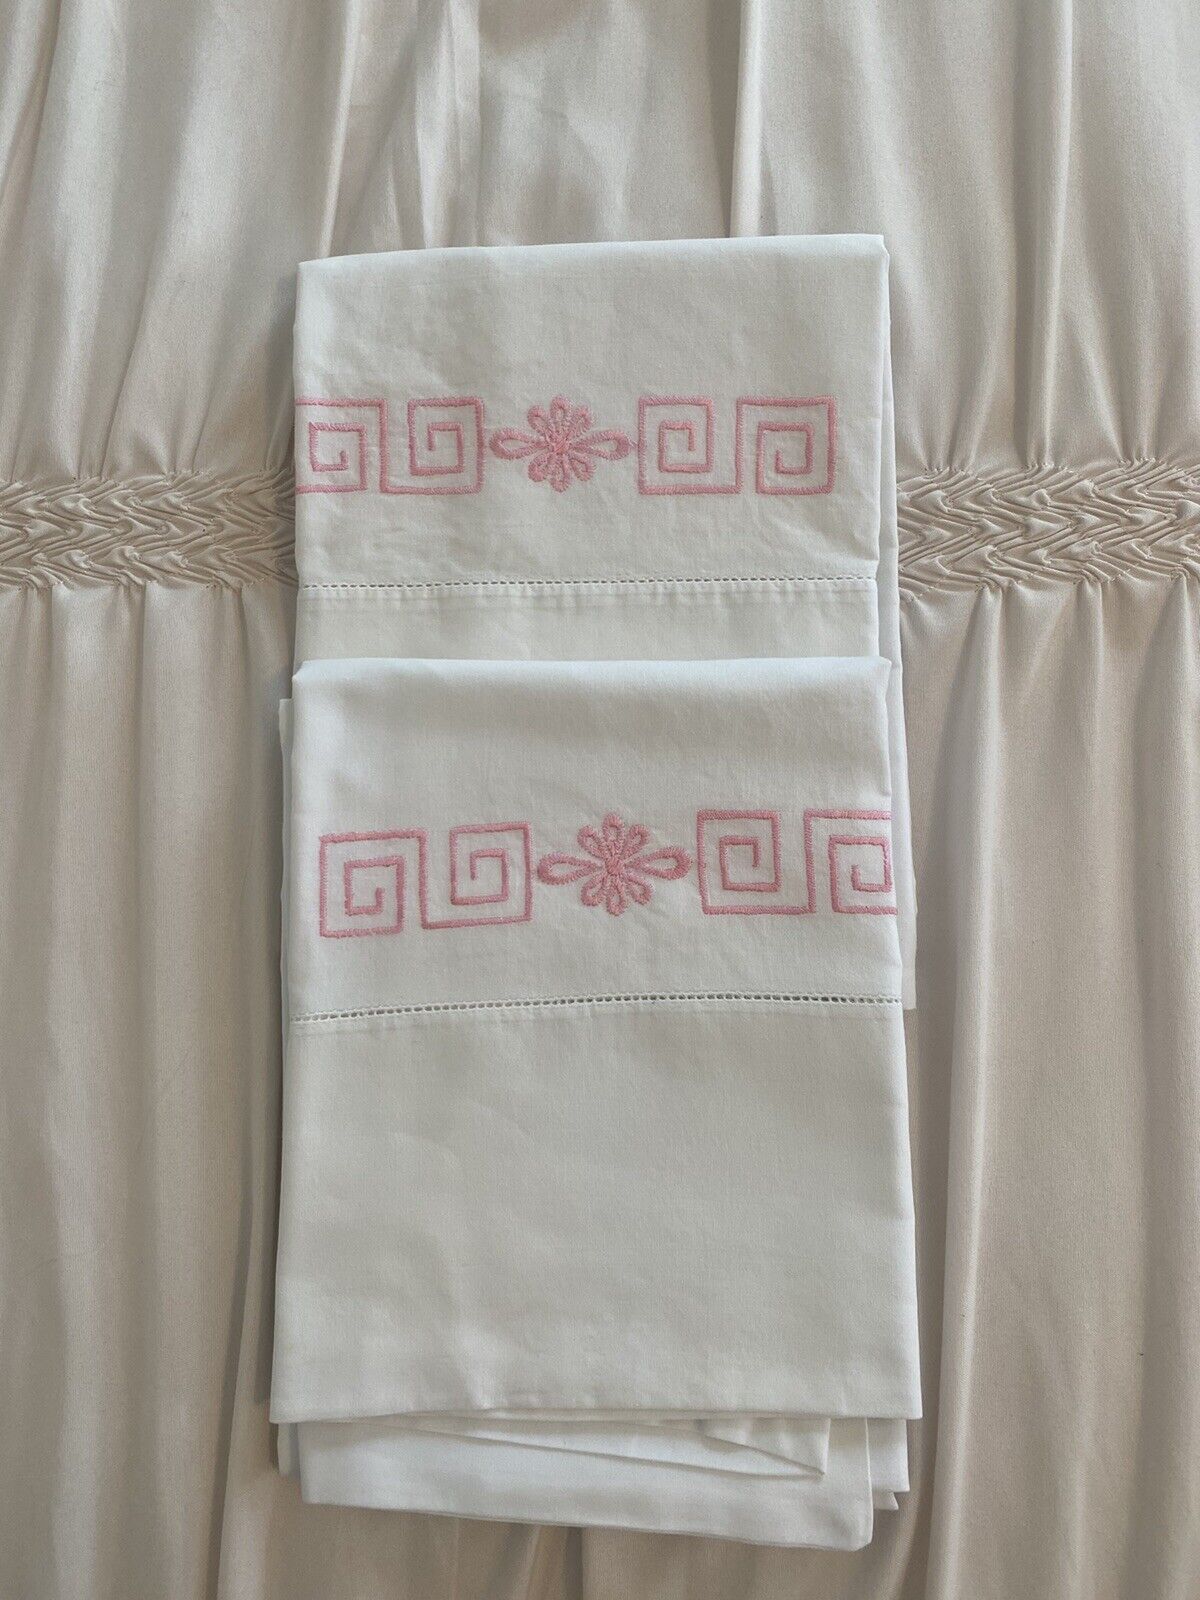 Vintage Embroidered Pillowcases Classic Greek Key Design White & Pink